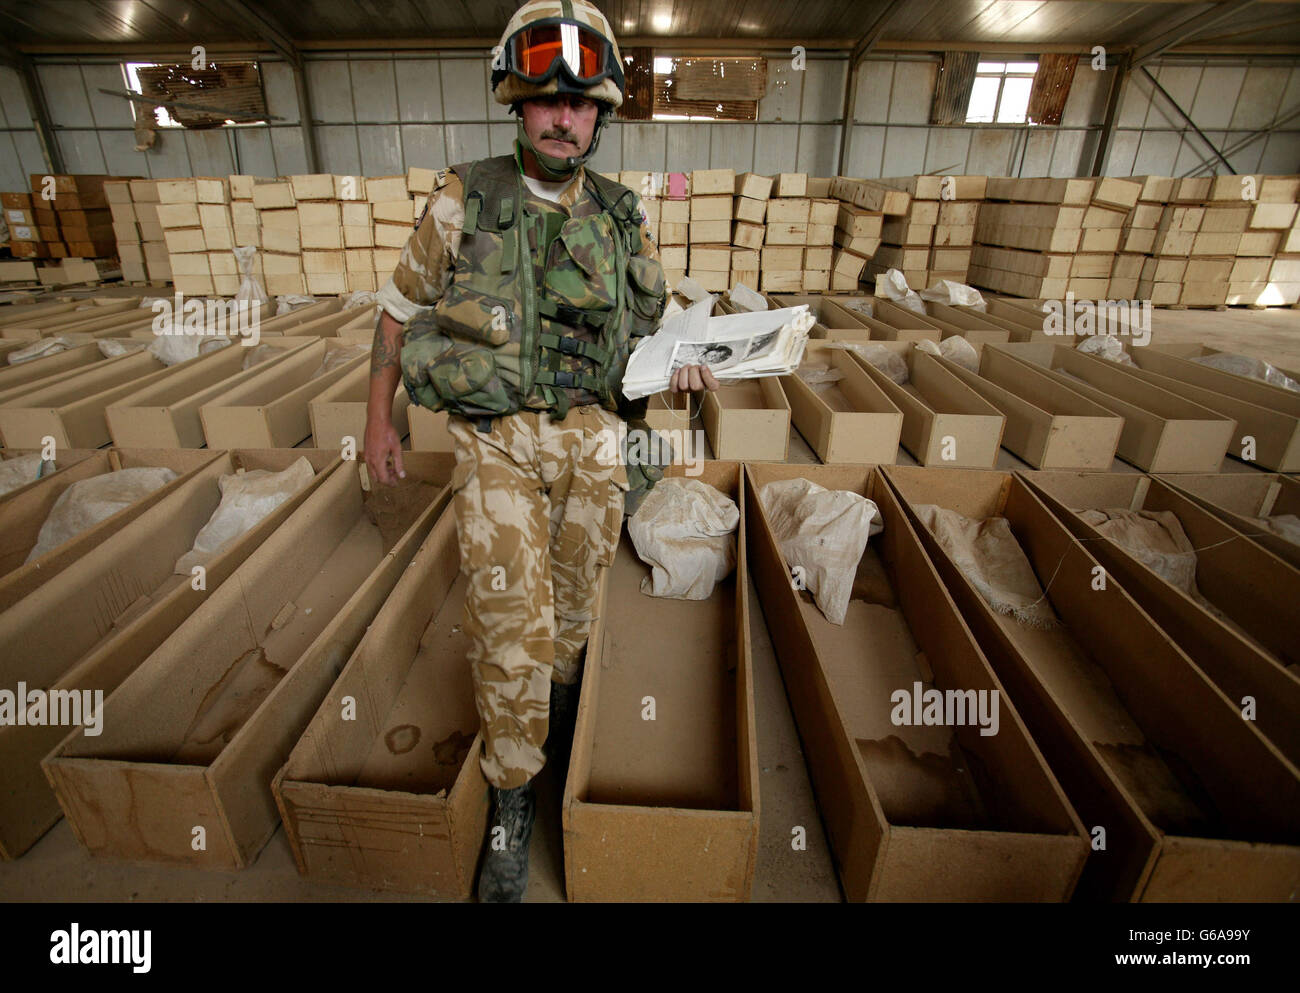 A soldier holds a book showing the dead bodies of what is thought to be Iraqis, discovered along with human remains and coffins at an abandoned Iraqi base near Basra. Hundreds of human remains were discovered in a makeshift morgue by British soldiers in southern Iraq. Dan Chung / Guardian / MOD Pool. *... The skulls, bundles of bone in strips of military uniform, were dumped in plastic bags and unsealed hardboard coffins in an abandoned Iraqi military base on the outskirts of Al Zubayr. It was impossible to say how long the remains had lain there but the grim discovery will now be Stock Photo